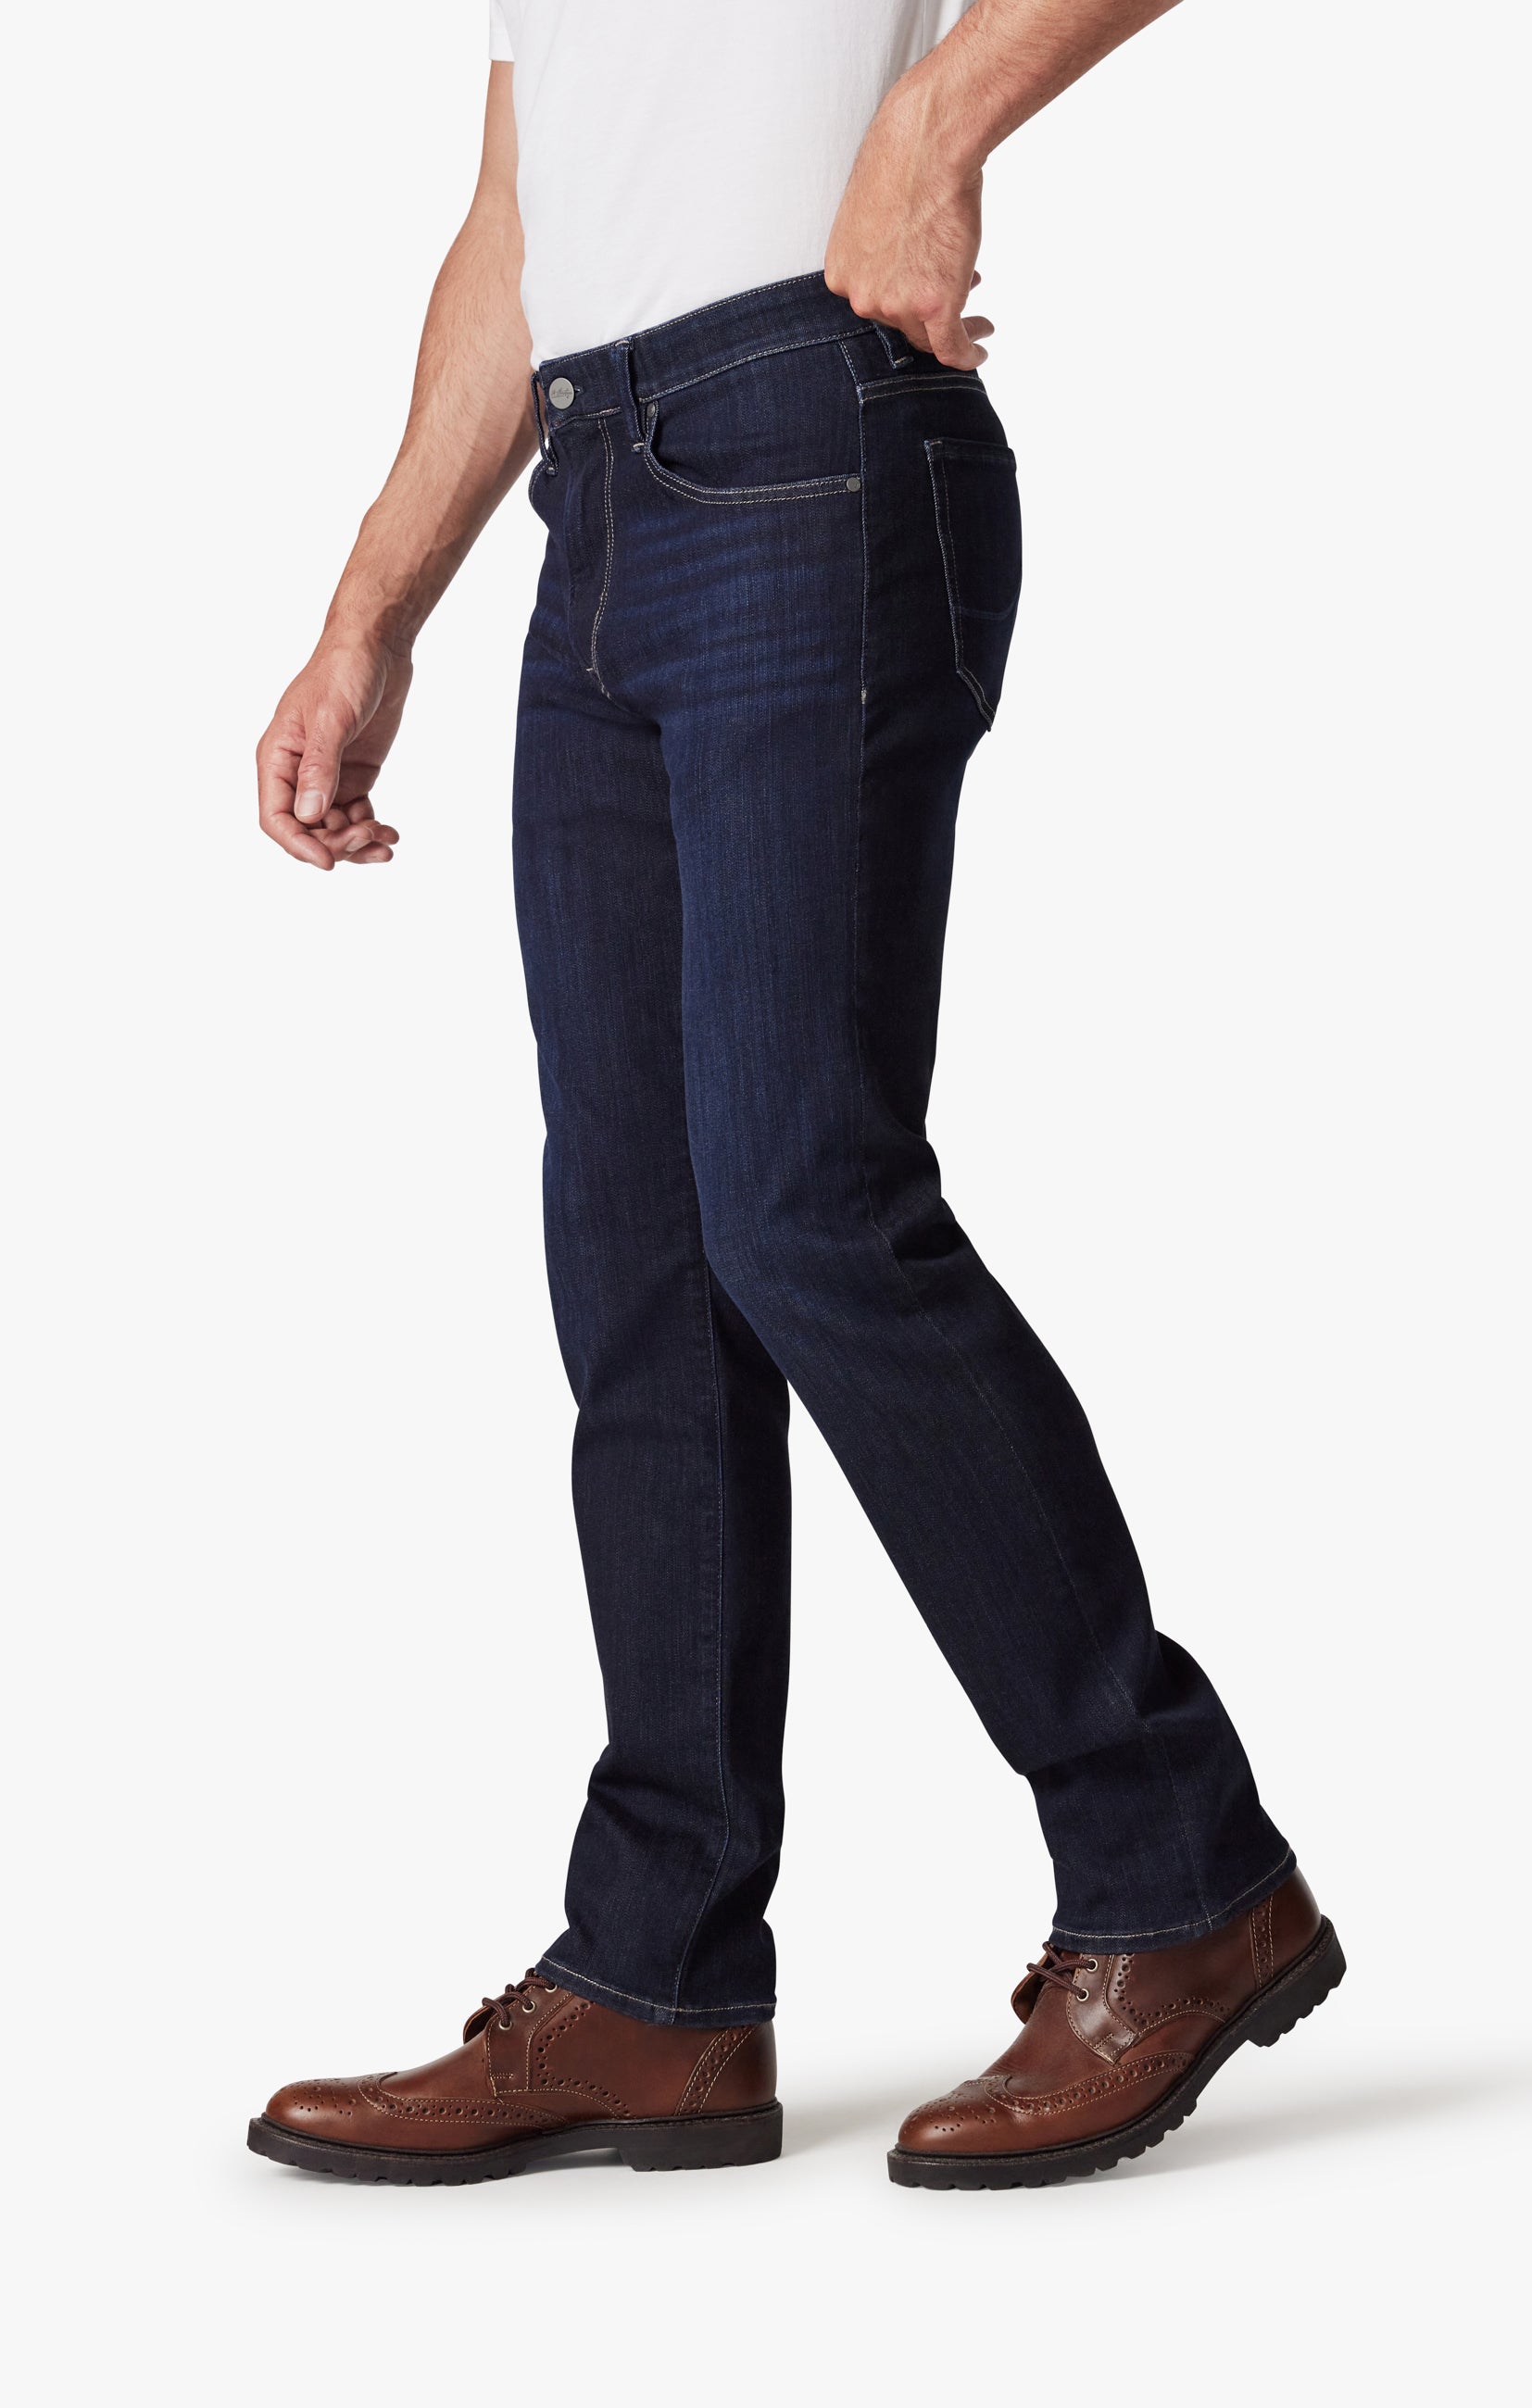 Champ Athletic Fit Jeans in Deep Refined Image 4